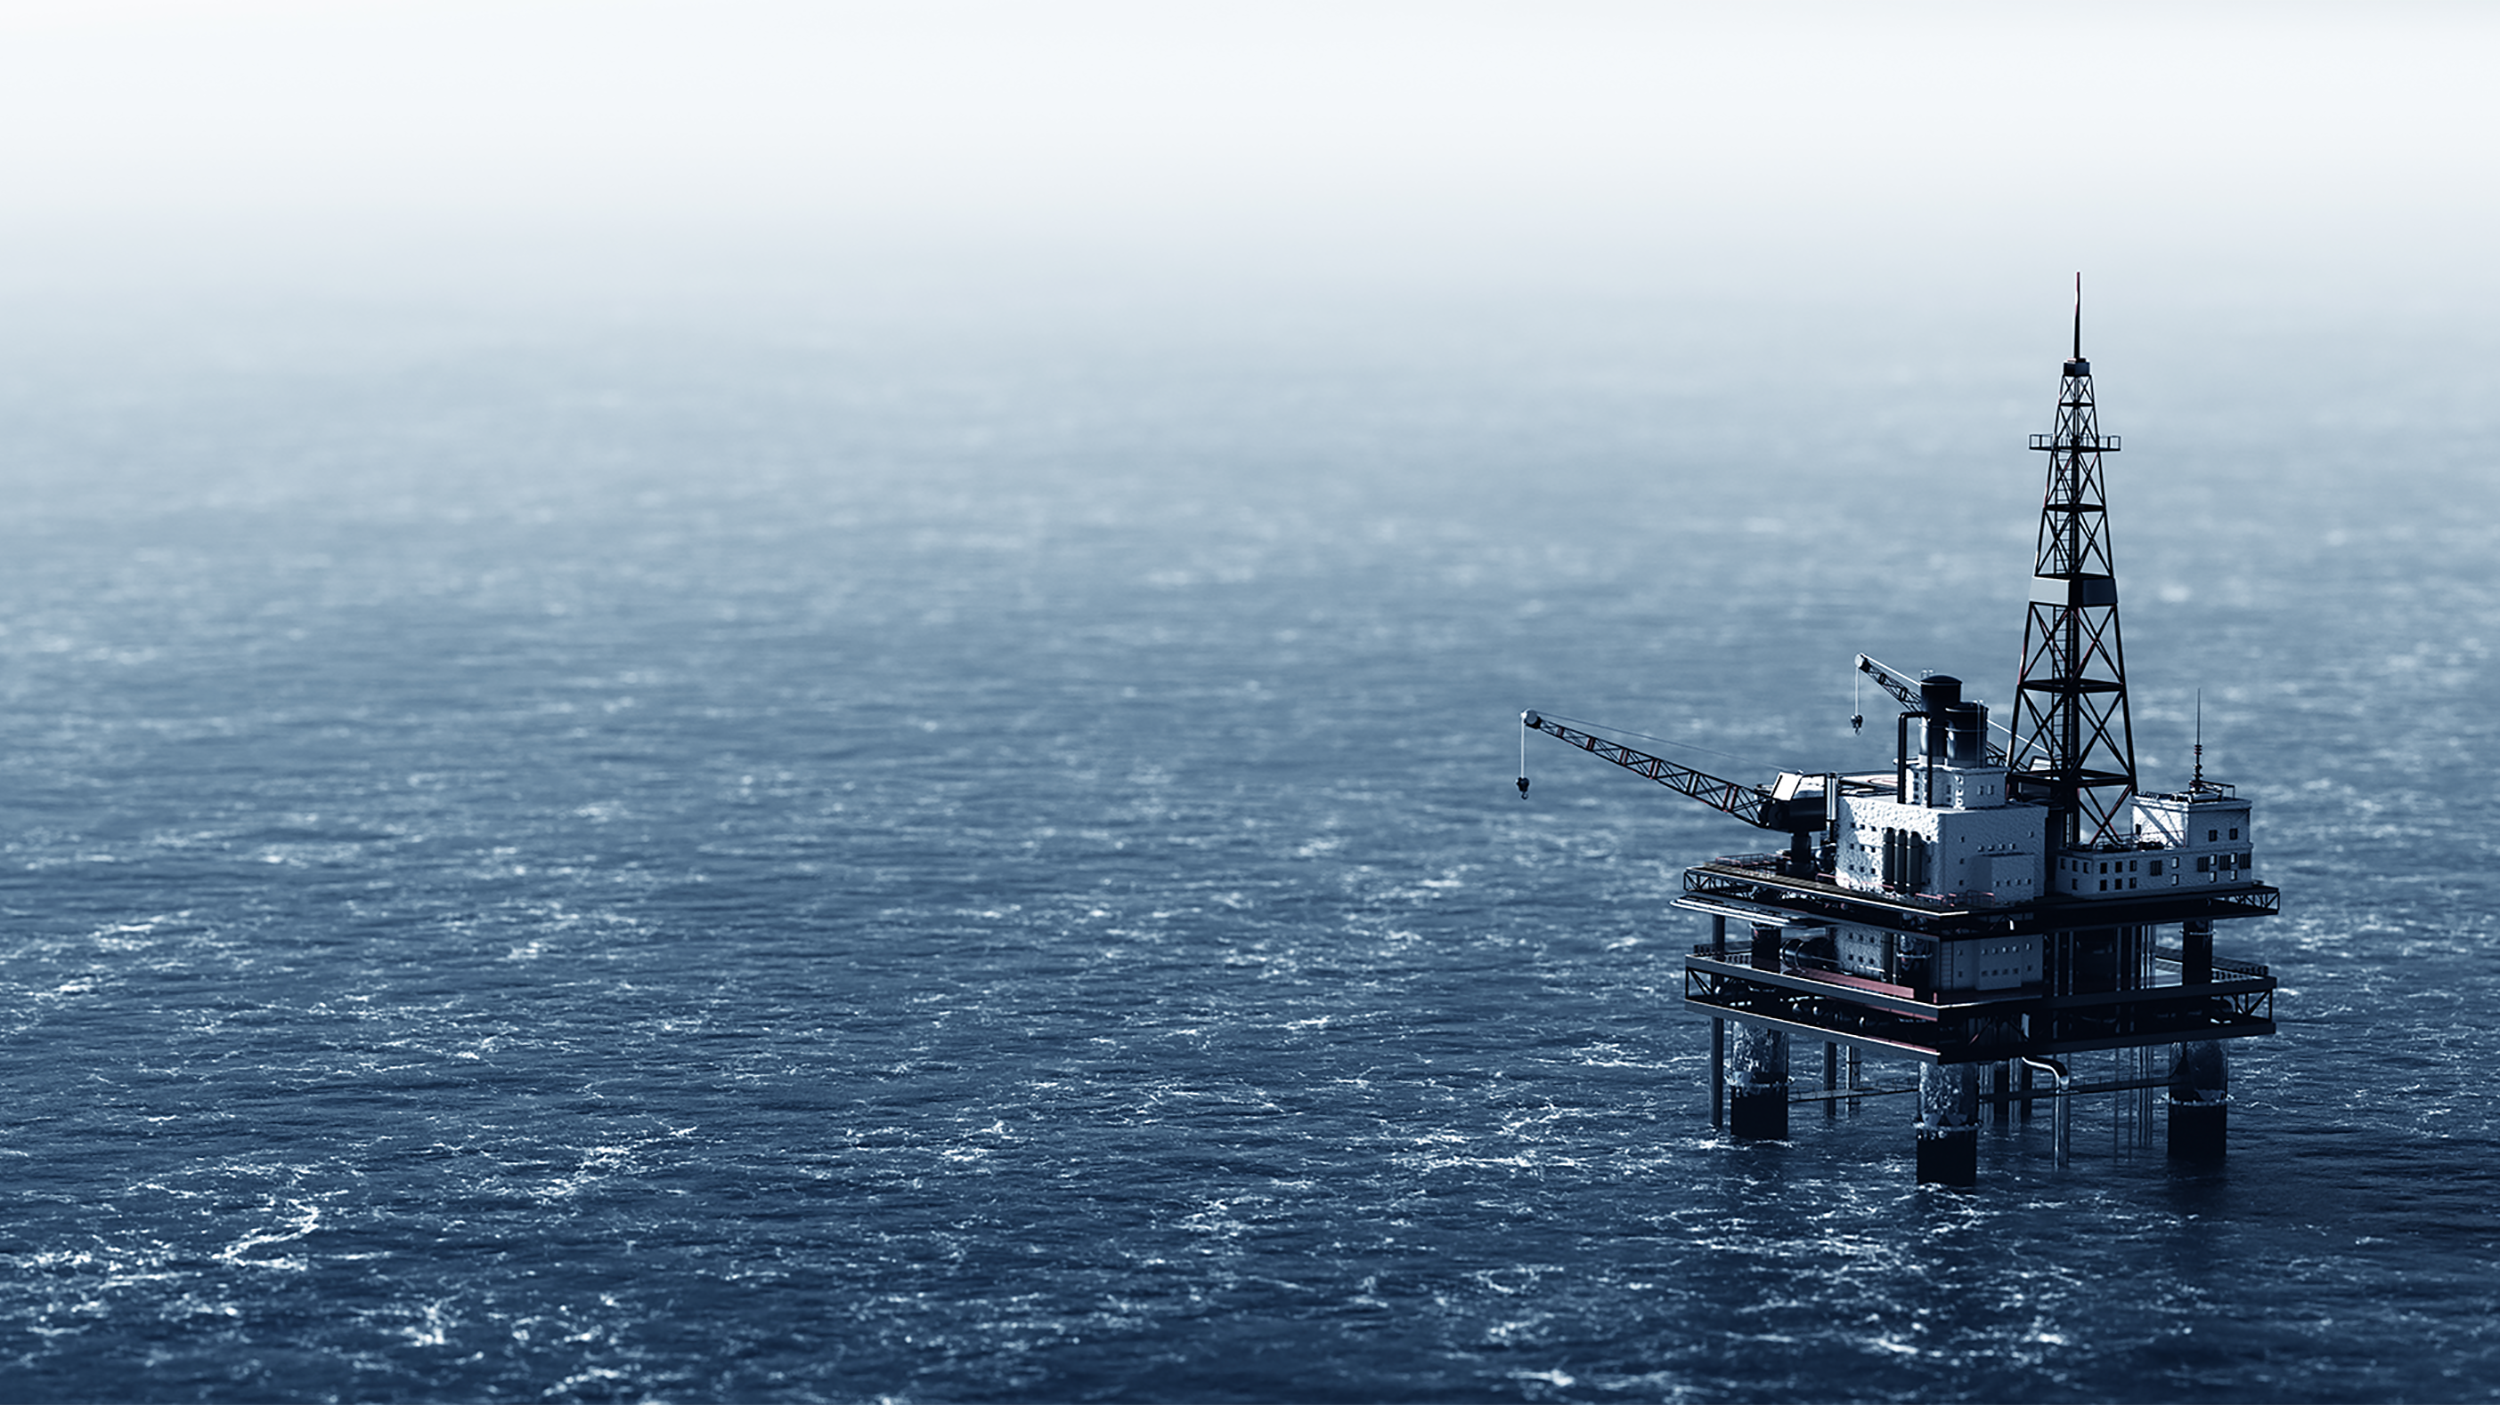 Intercept® RBP sucessfully isolates deepwater well for 780 days